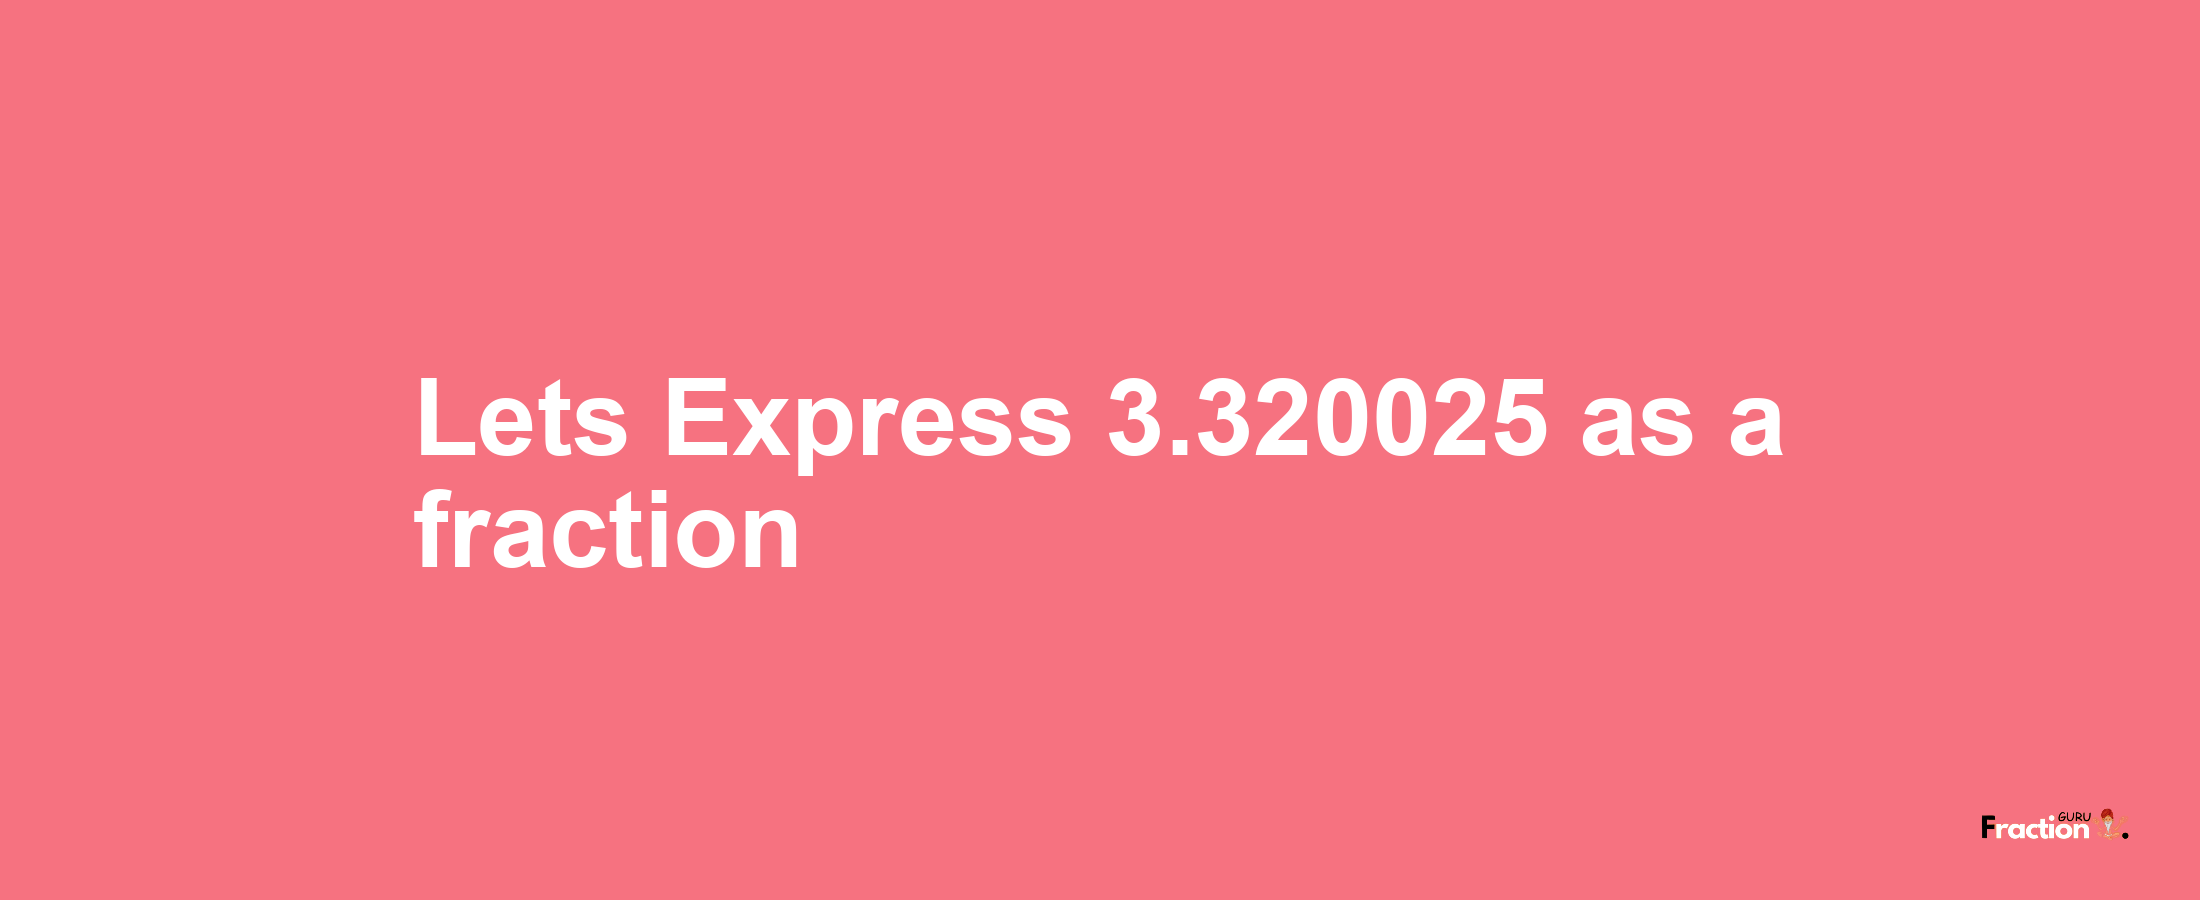 Lets Express 3.320025 as afraction